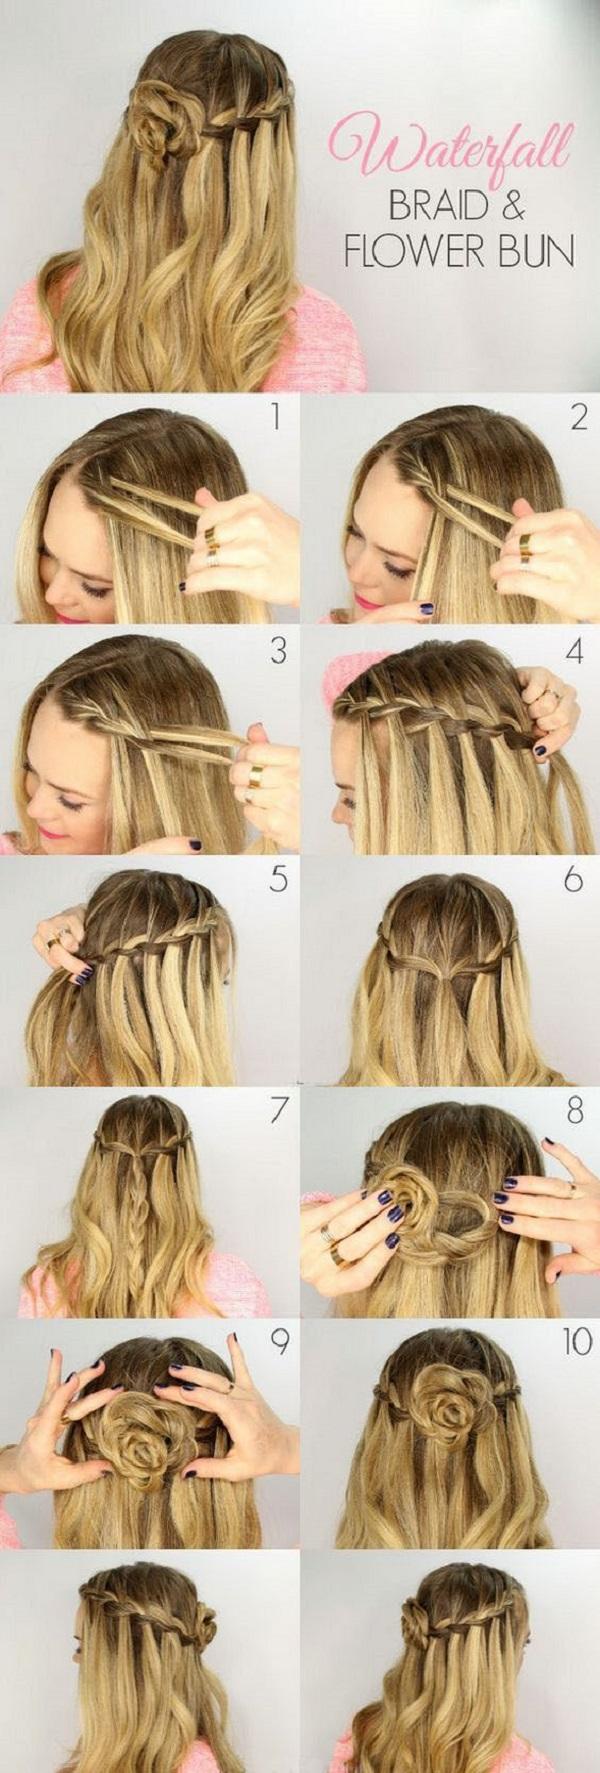 Easy Hairstyles For Long Hair To Do At Home  So Simple Ideas